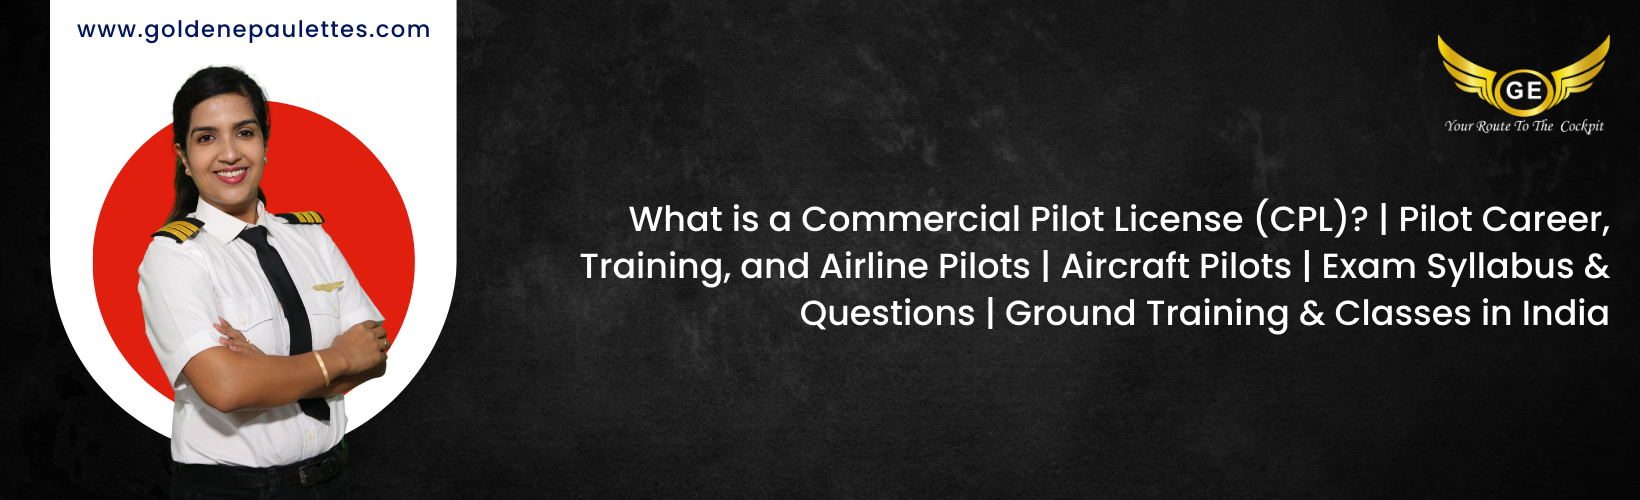 Ground Classes for DGCA Exams | What is a Commercial Pilot License (CPL)